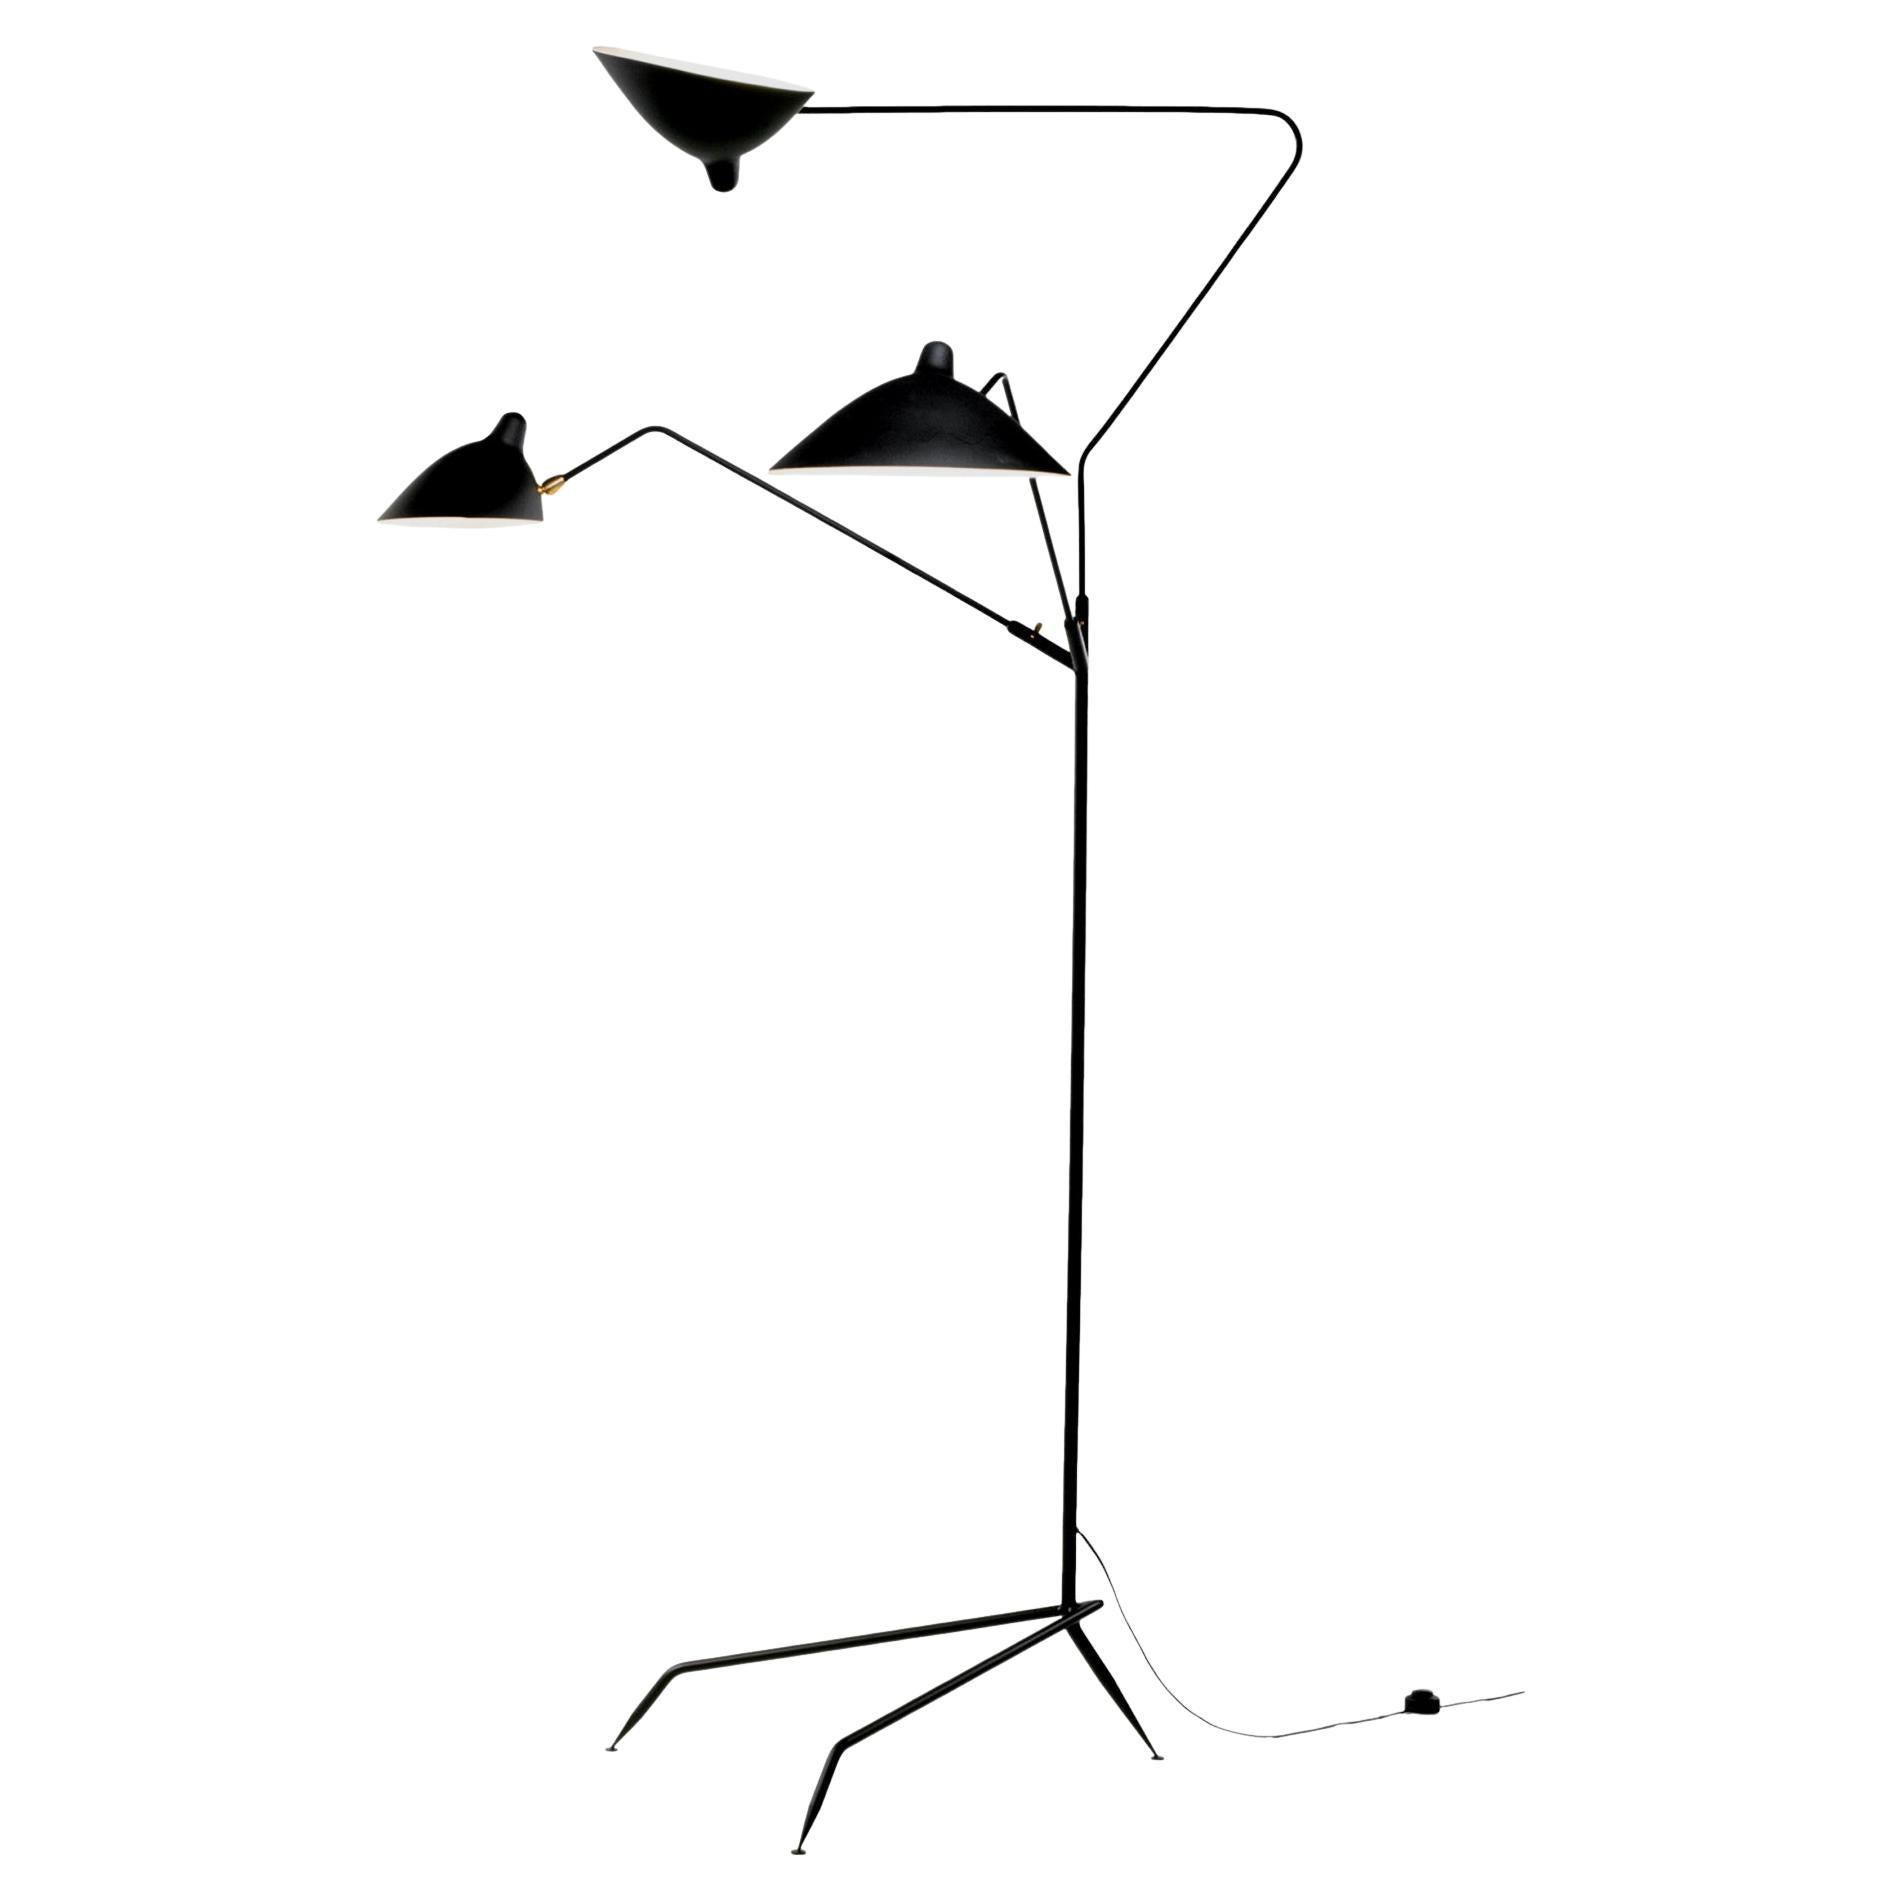 Serge Mouille Standing Lamp with Three Arms in Black